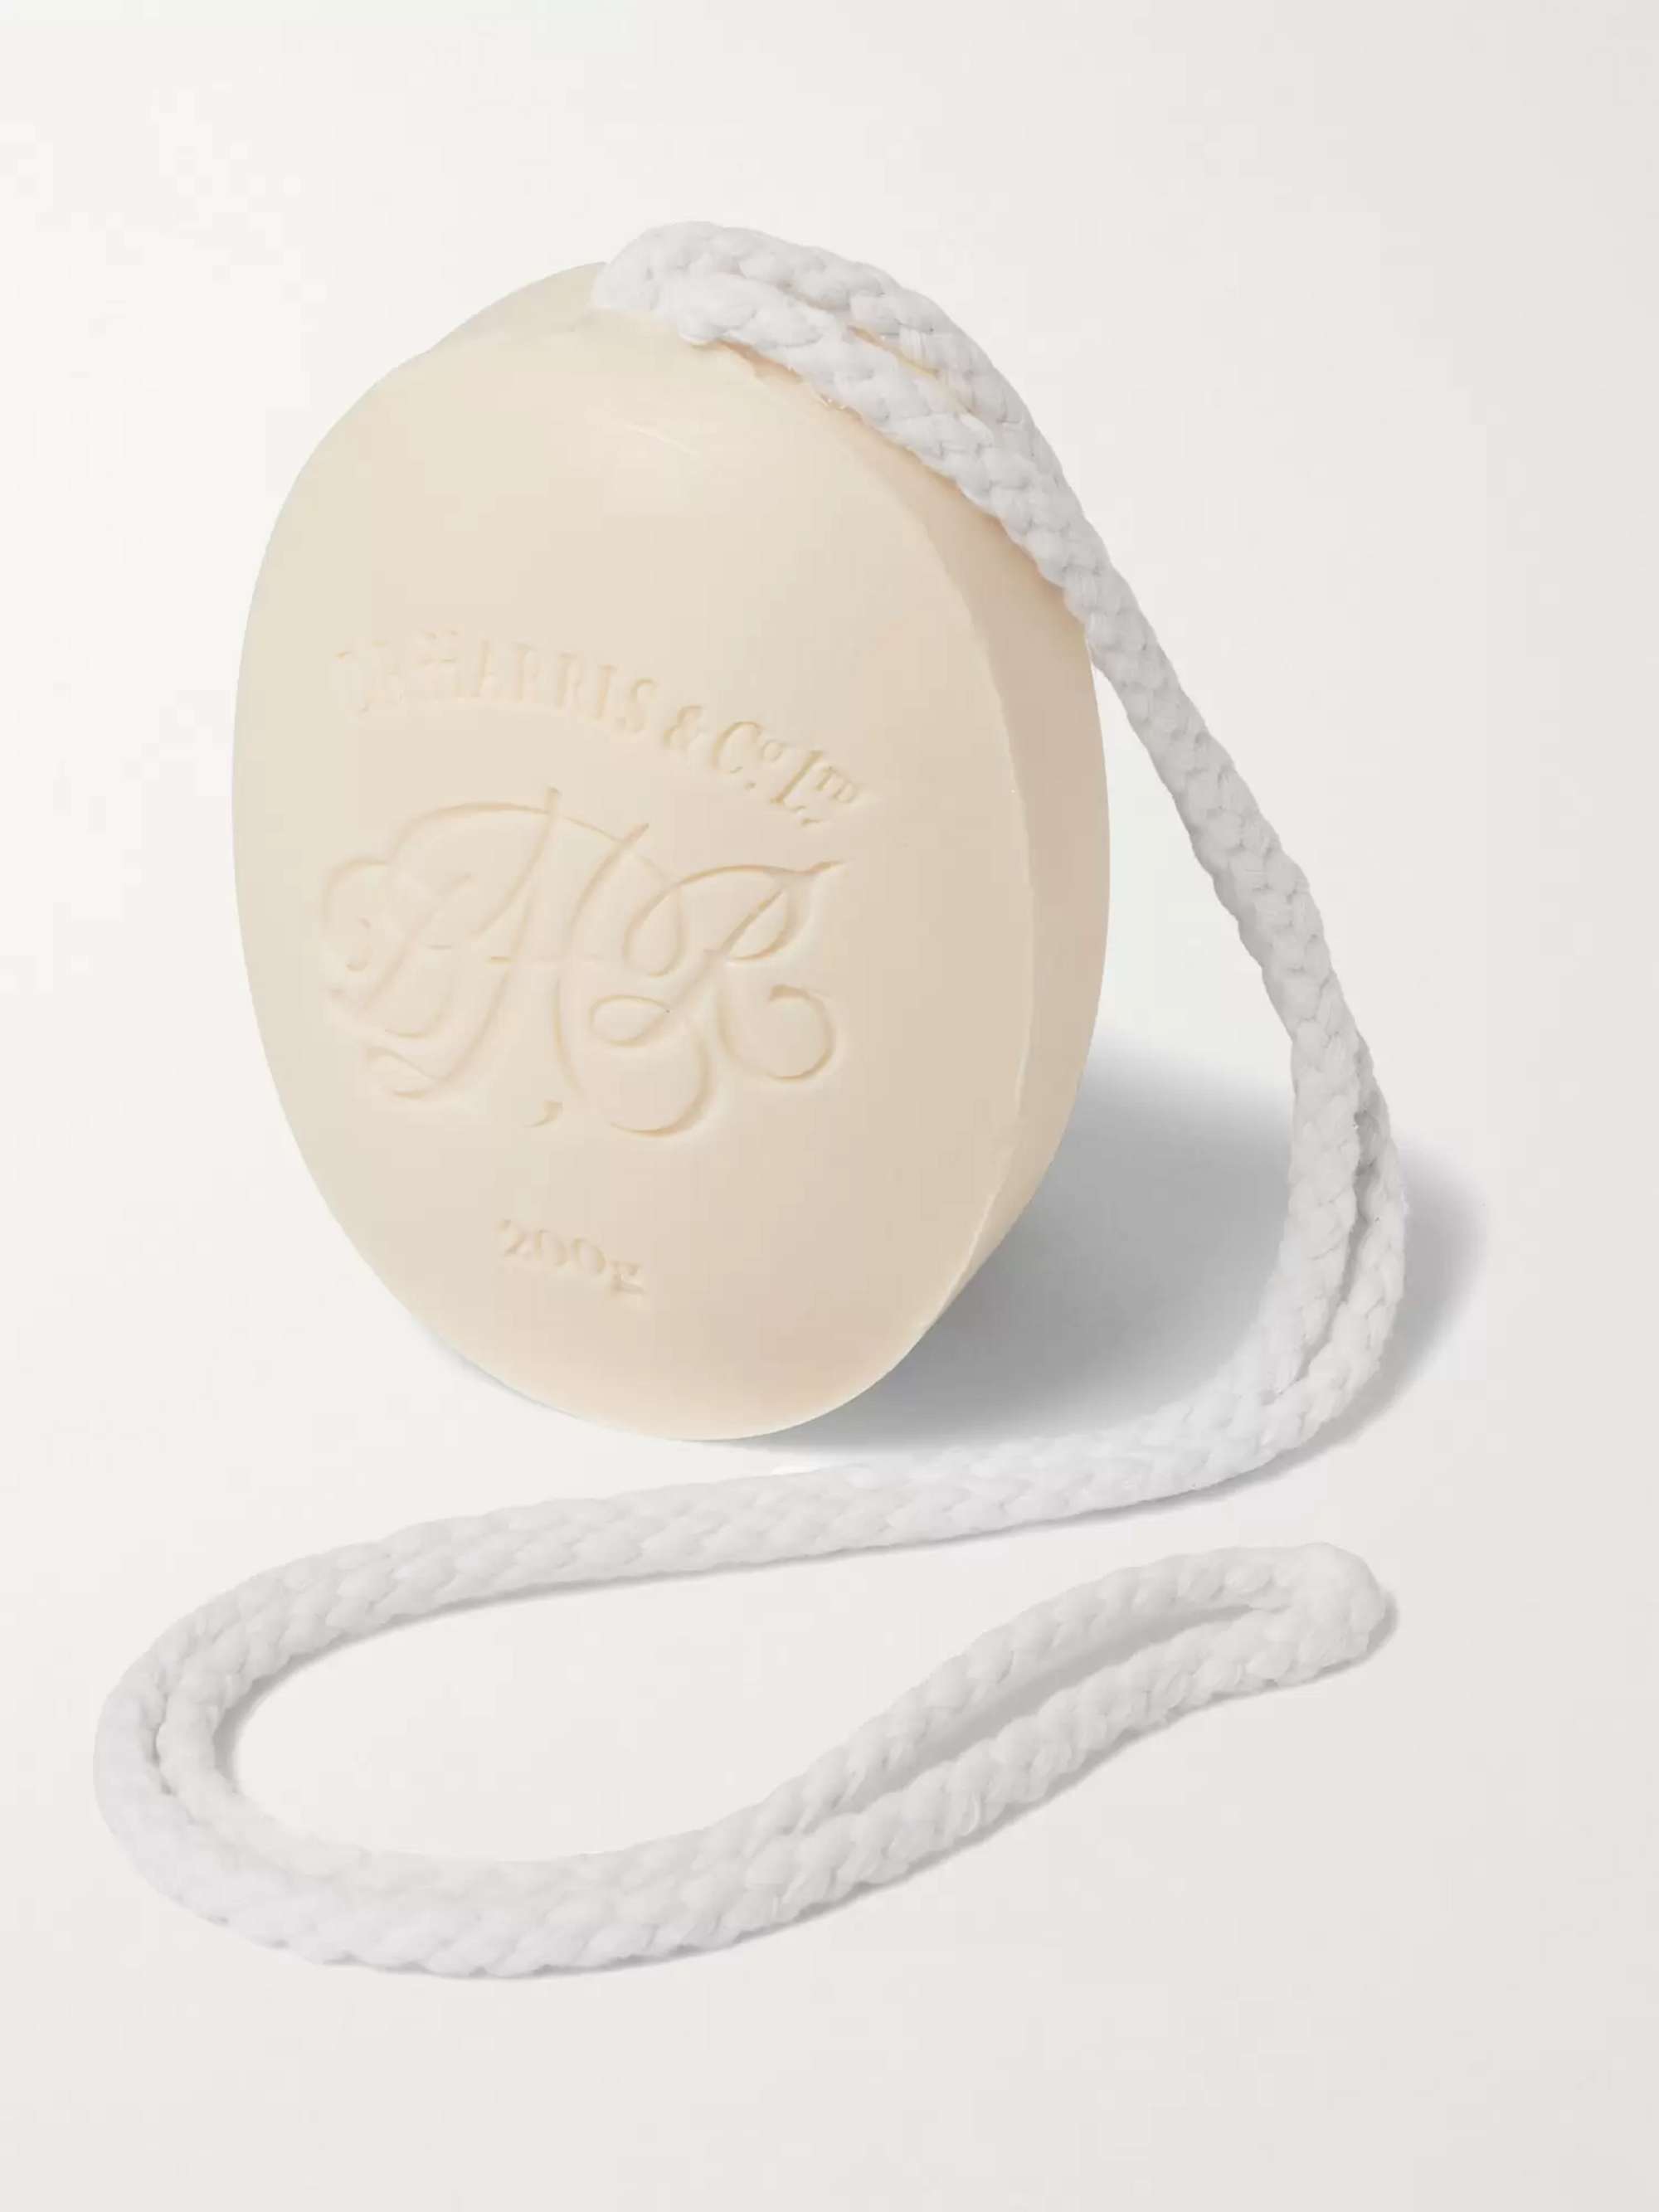 D R HARRIS Almond Oil Soap on a Rope, 200g